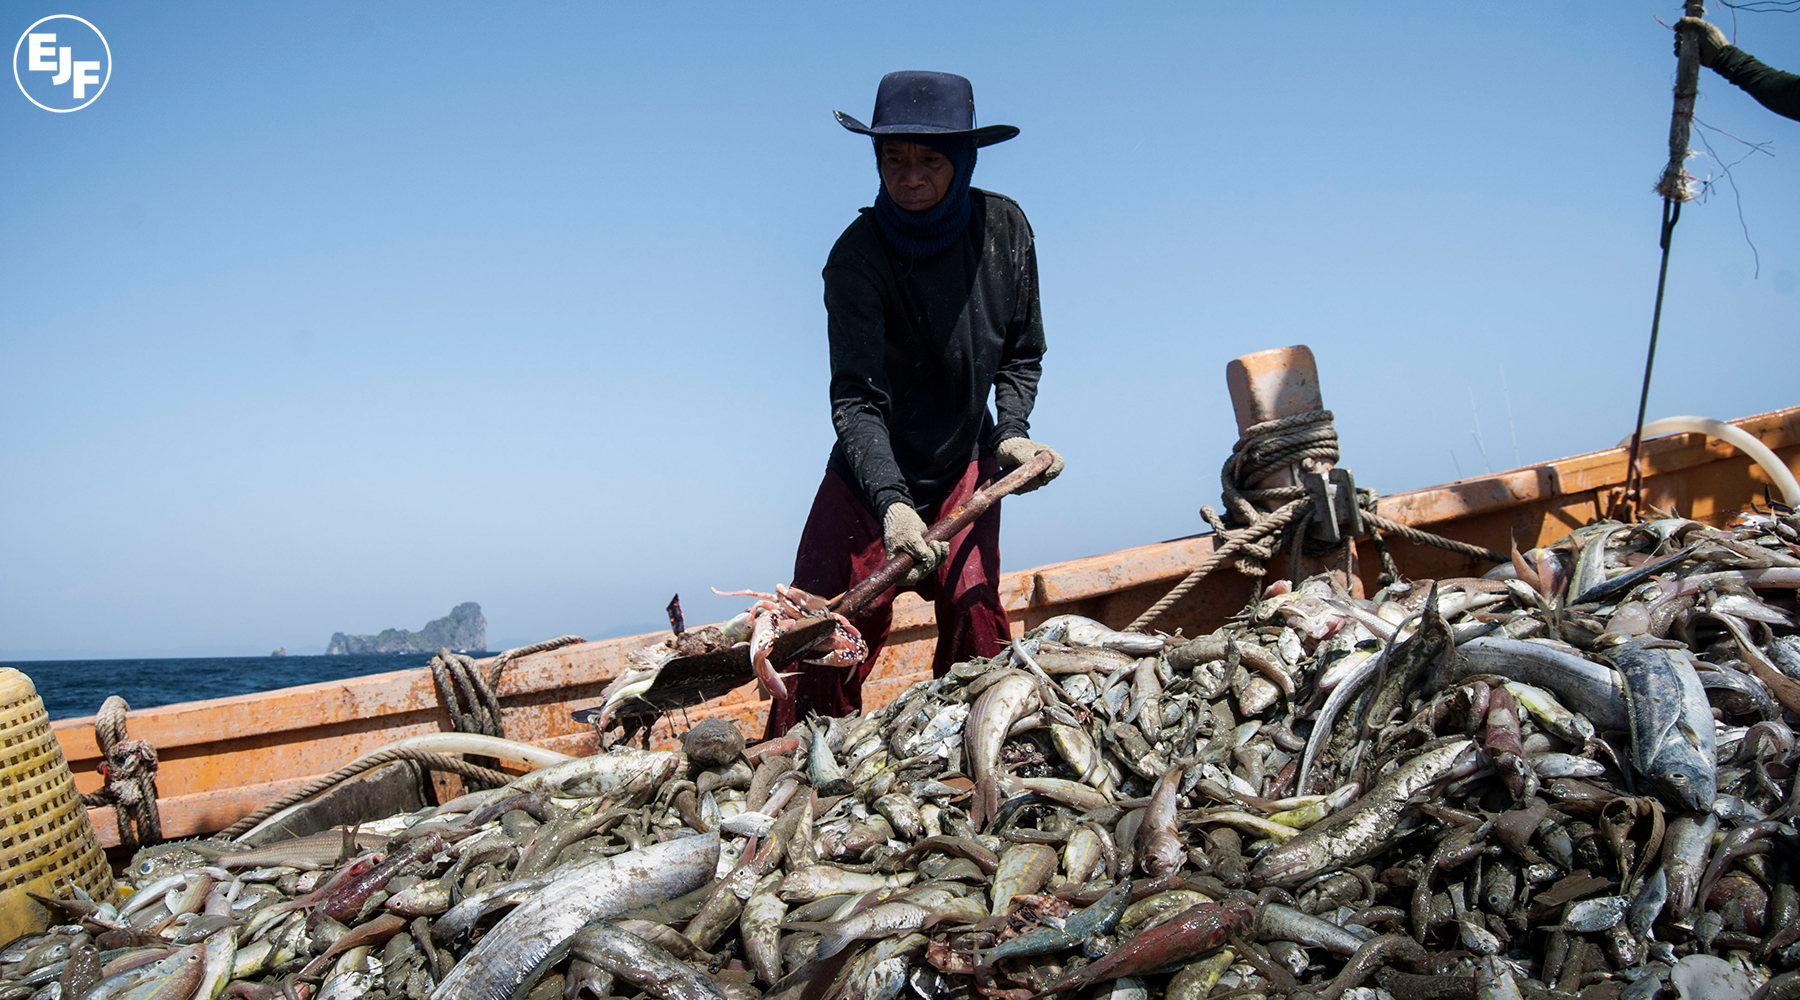 Overfishing and pirate fishing perpetuate environmental degradation and modern-day slavery in Thailand